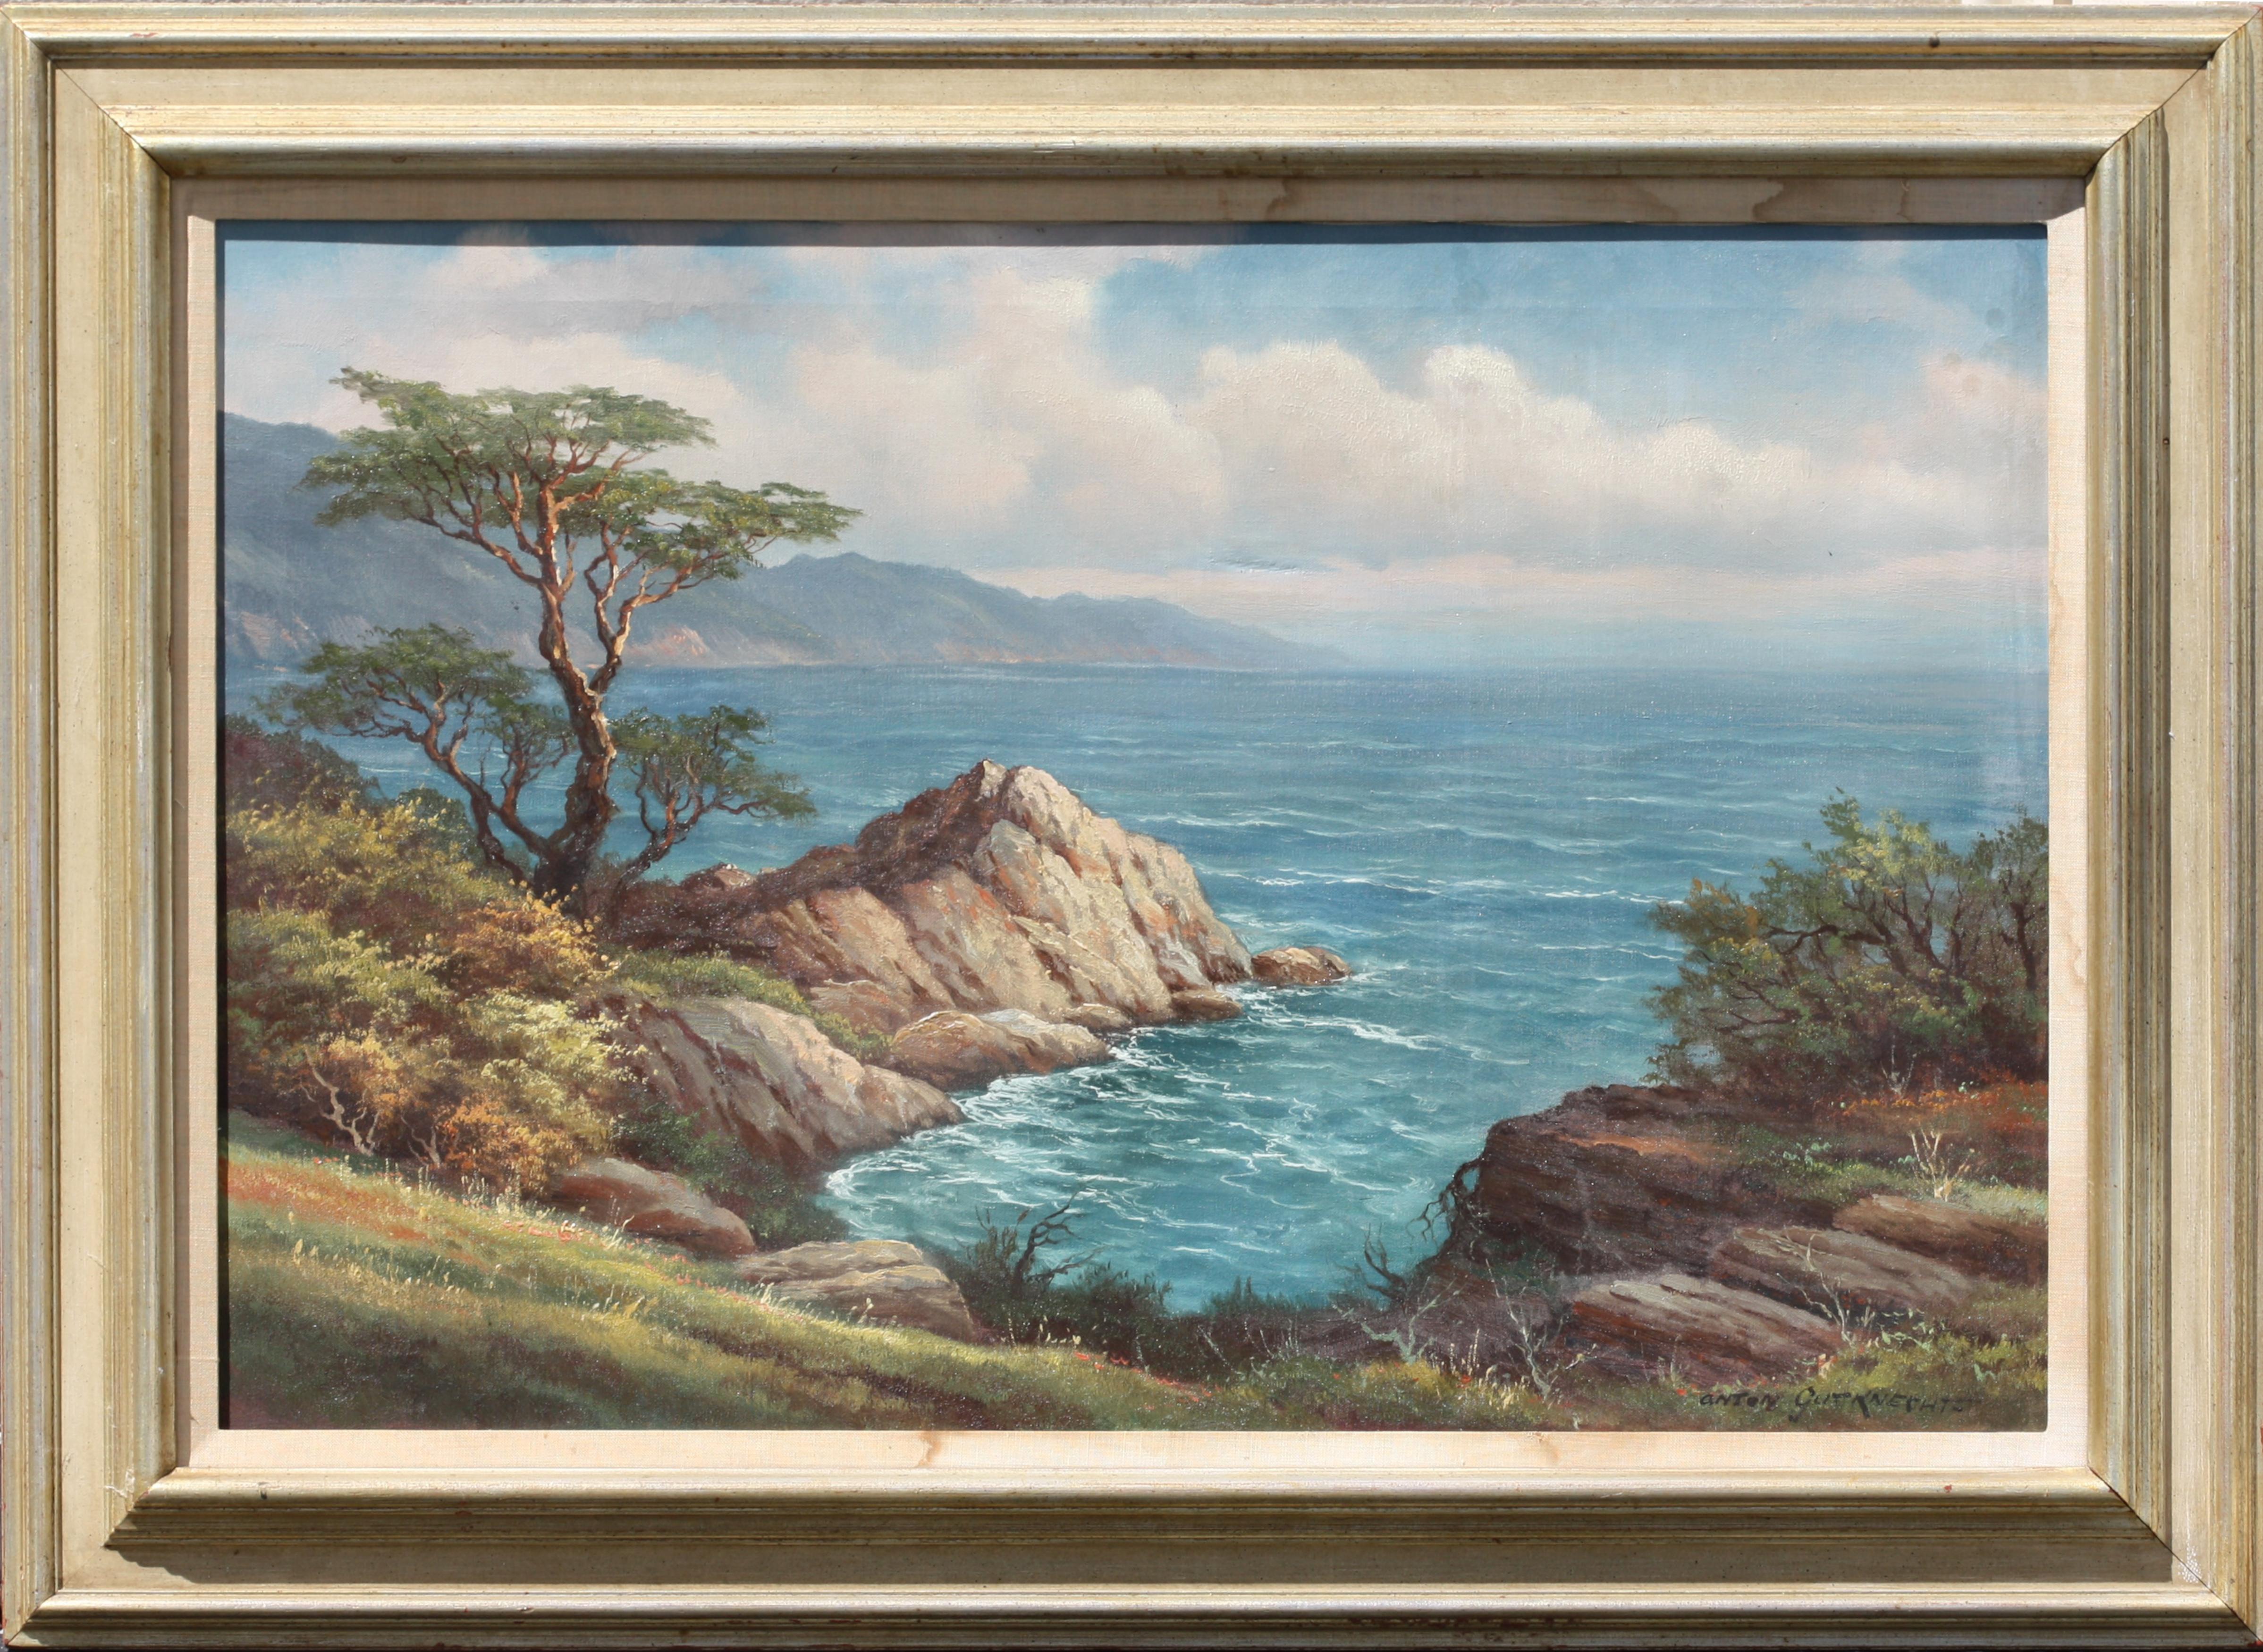 Anton GUTKNECHT (1907-1988)
Oil on canvas
Monterey, Cypress Tree at Ocean side
signed lower right, Anton Gutknecht
Size with frame 44 x 32 inches (111.76 x 81.28 cm.), Canvas size 36 x 24 inches (91.44 x 60.96 cm.)

 